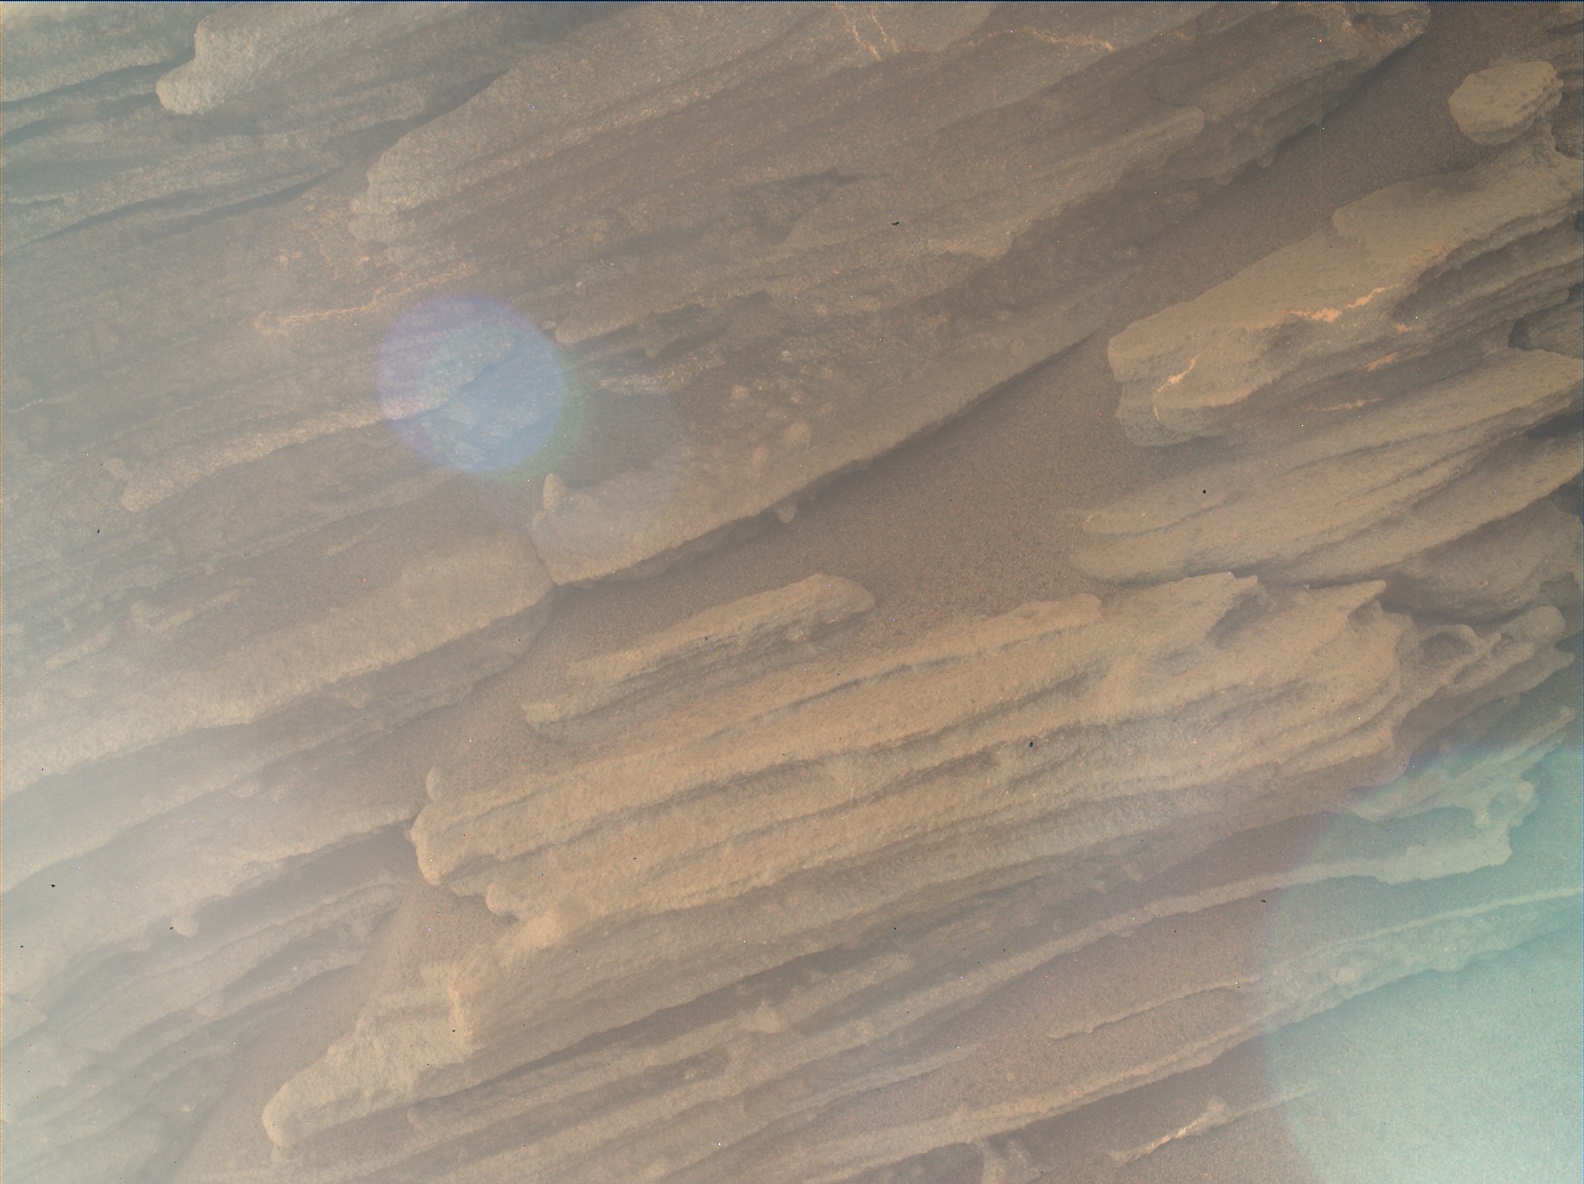 Nasa's Mars rover Curiosity acquired this image using its Mars Hand Lens Imager (MAHLI) on Sol 1351